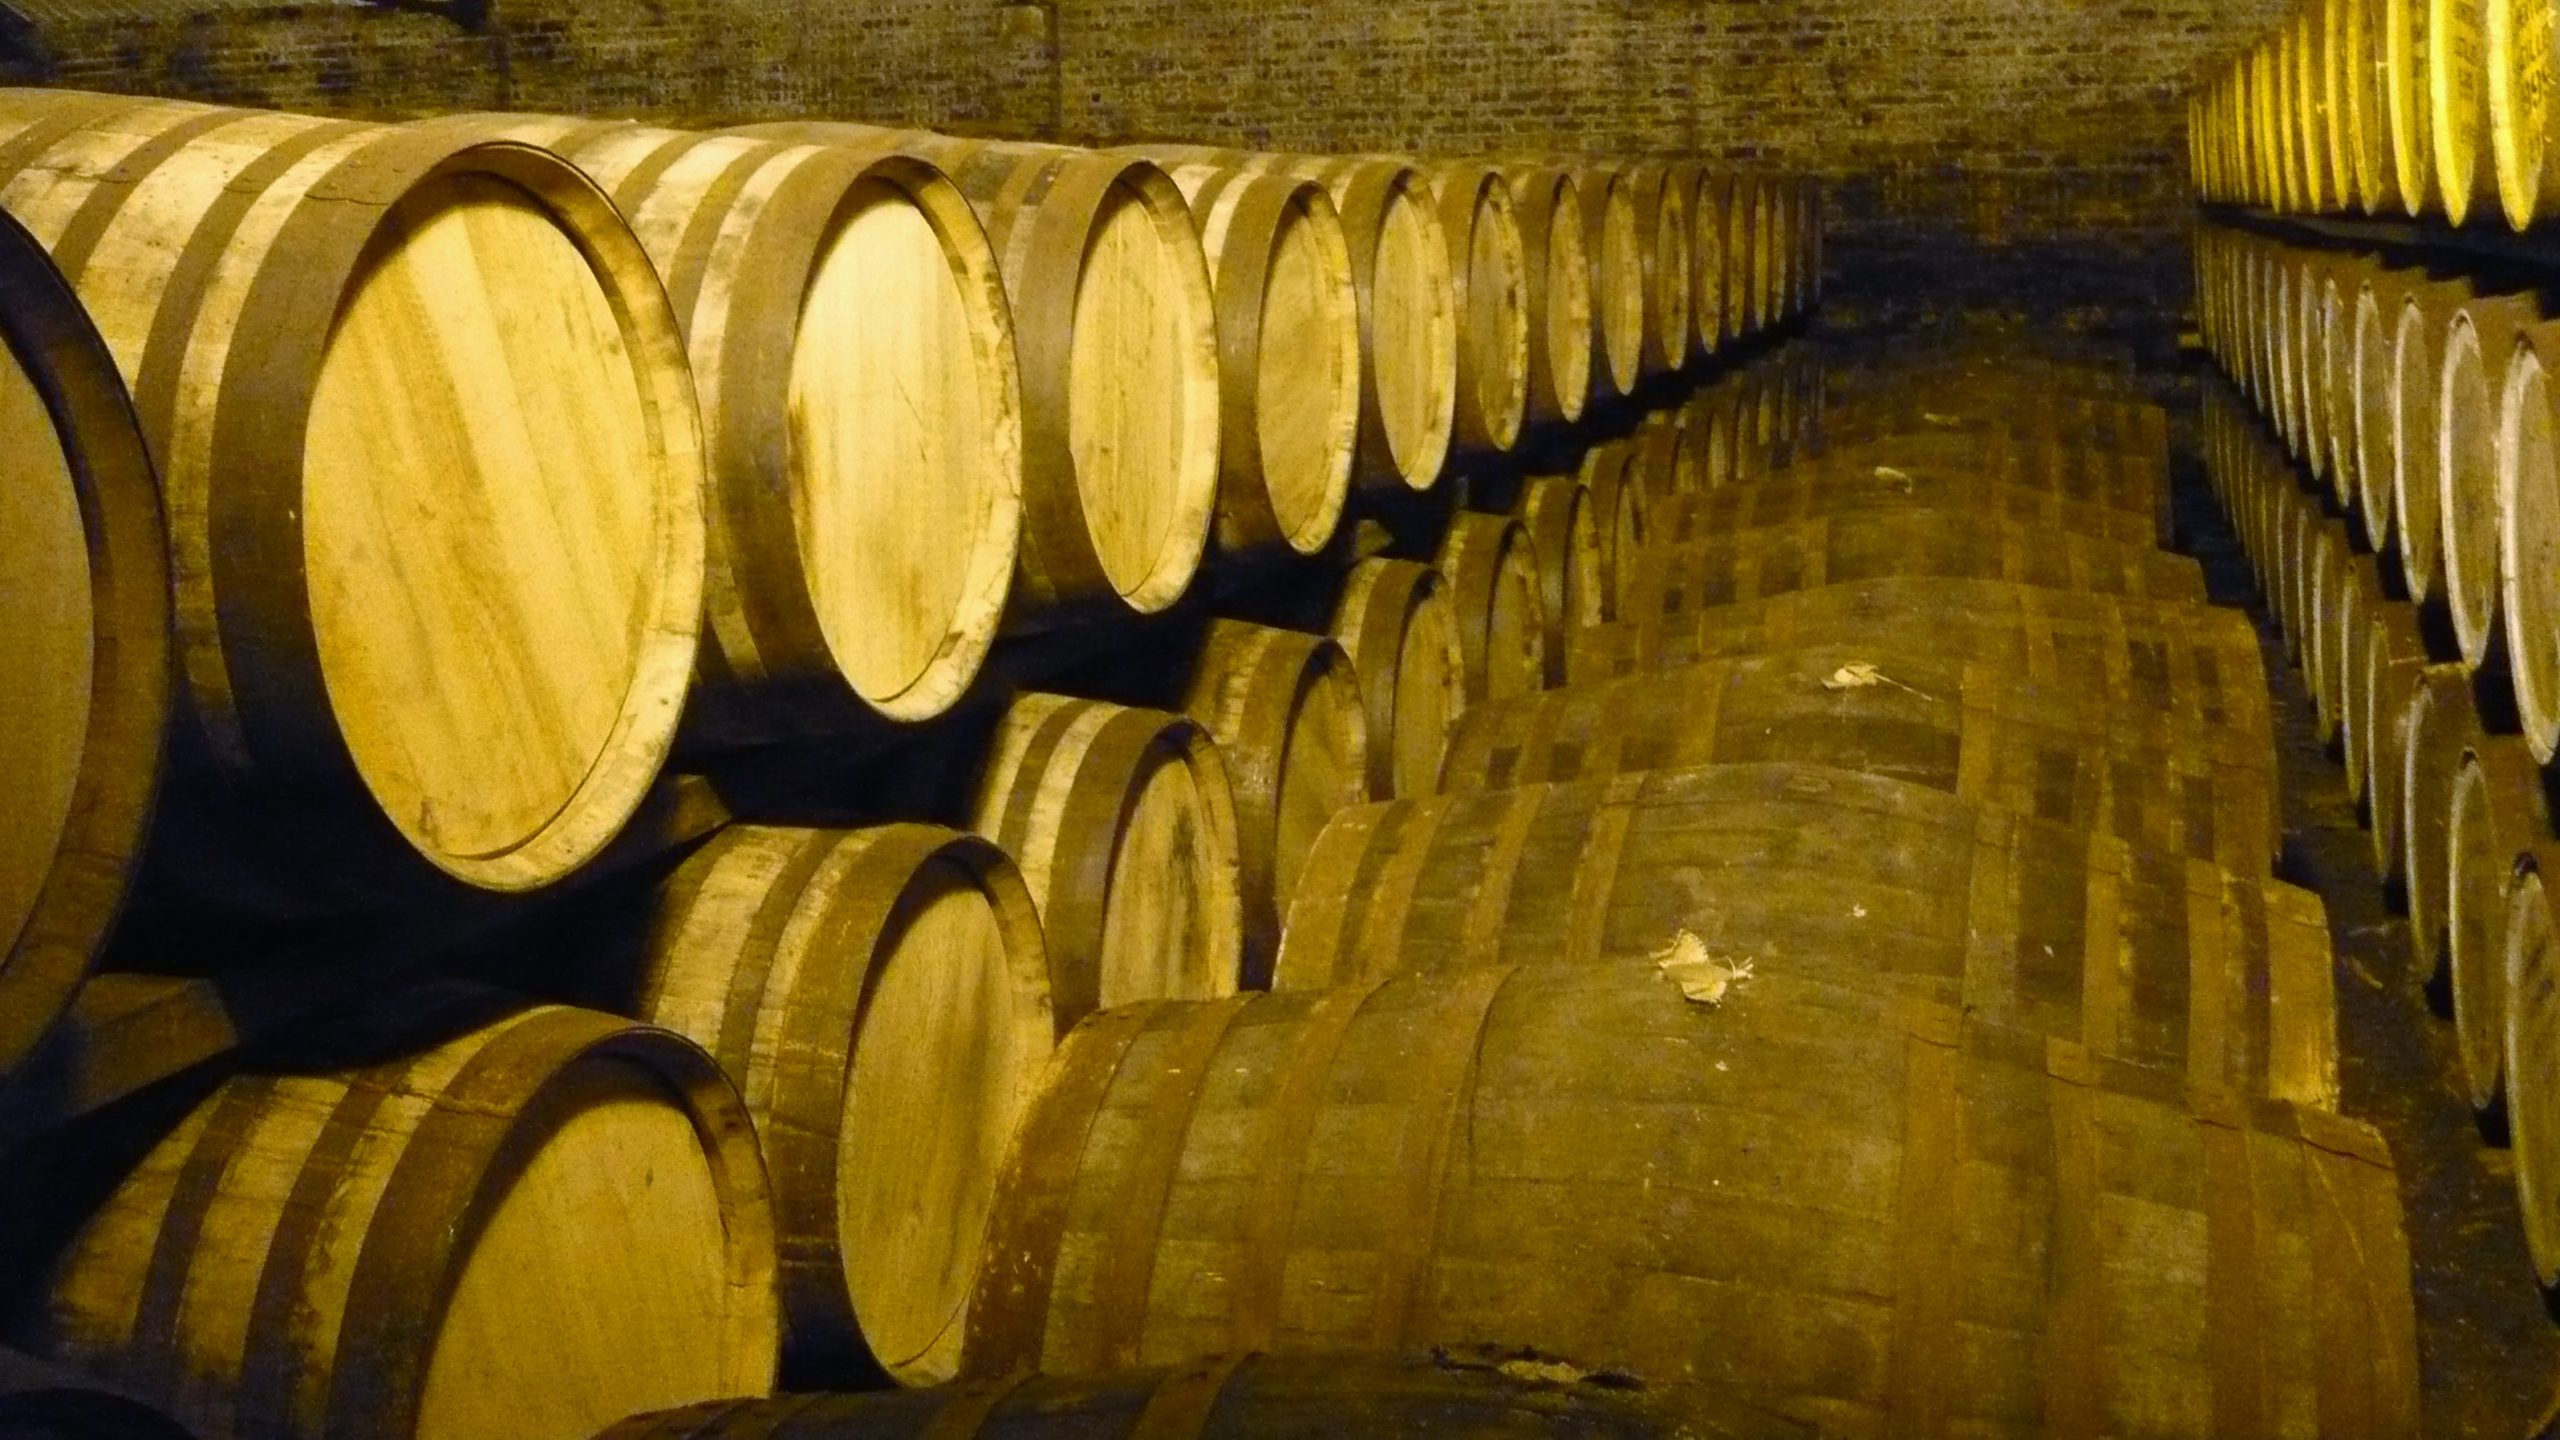 Whisky casks in warehouse